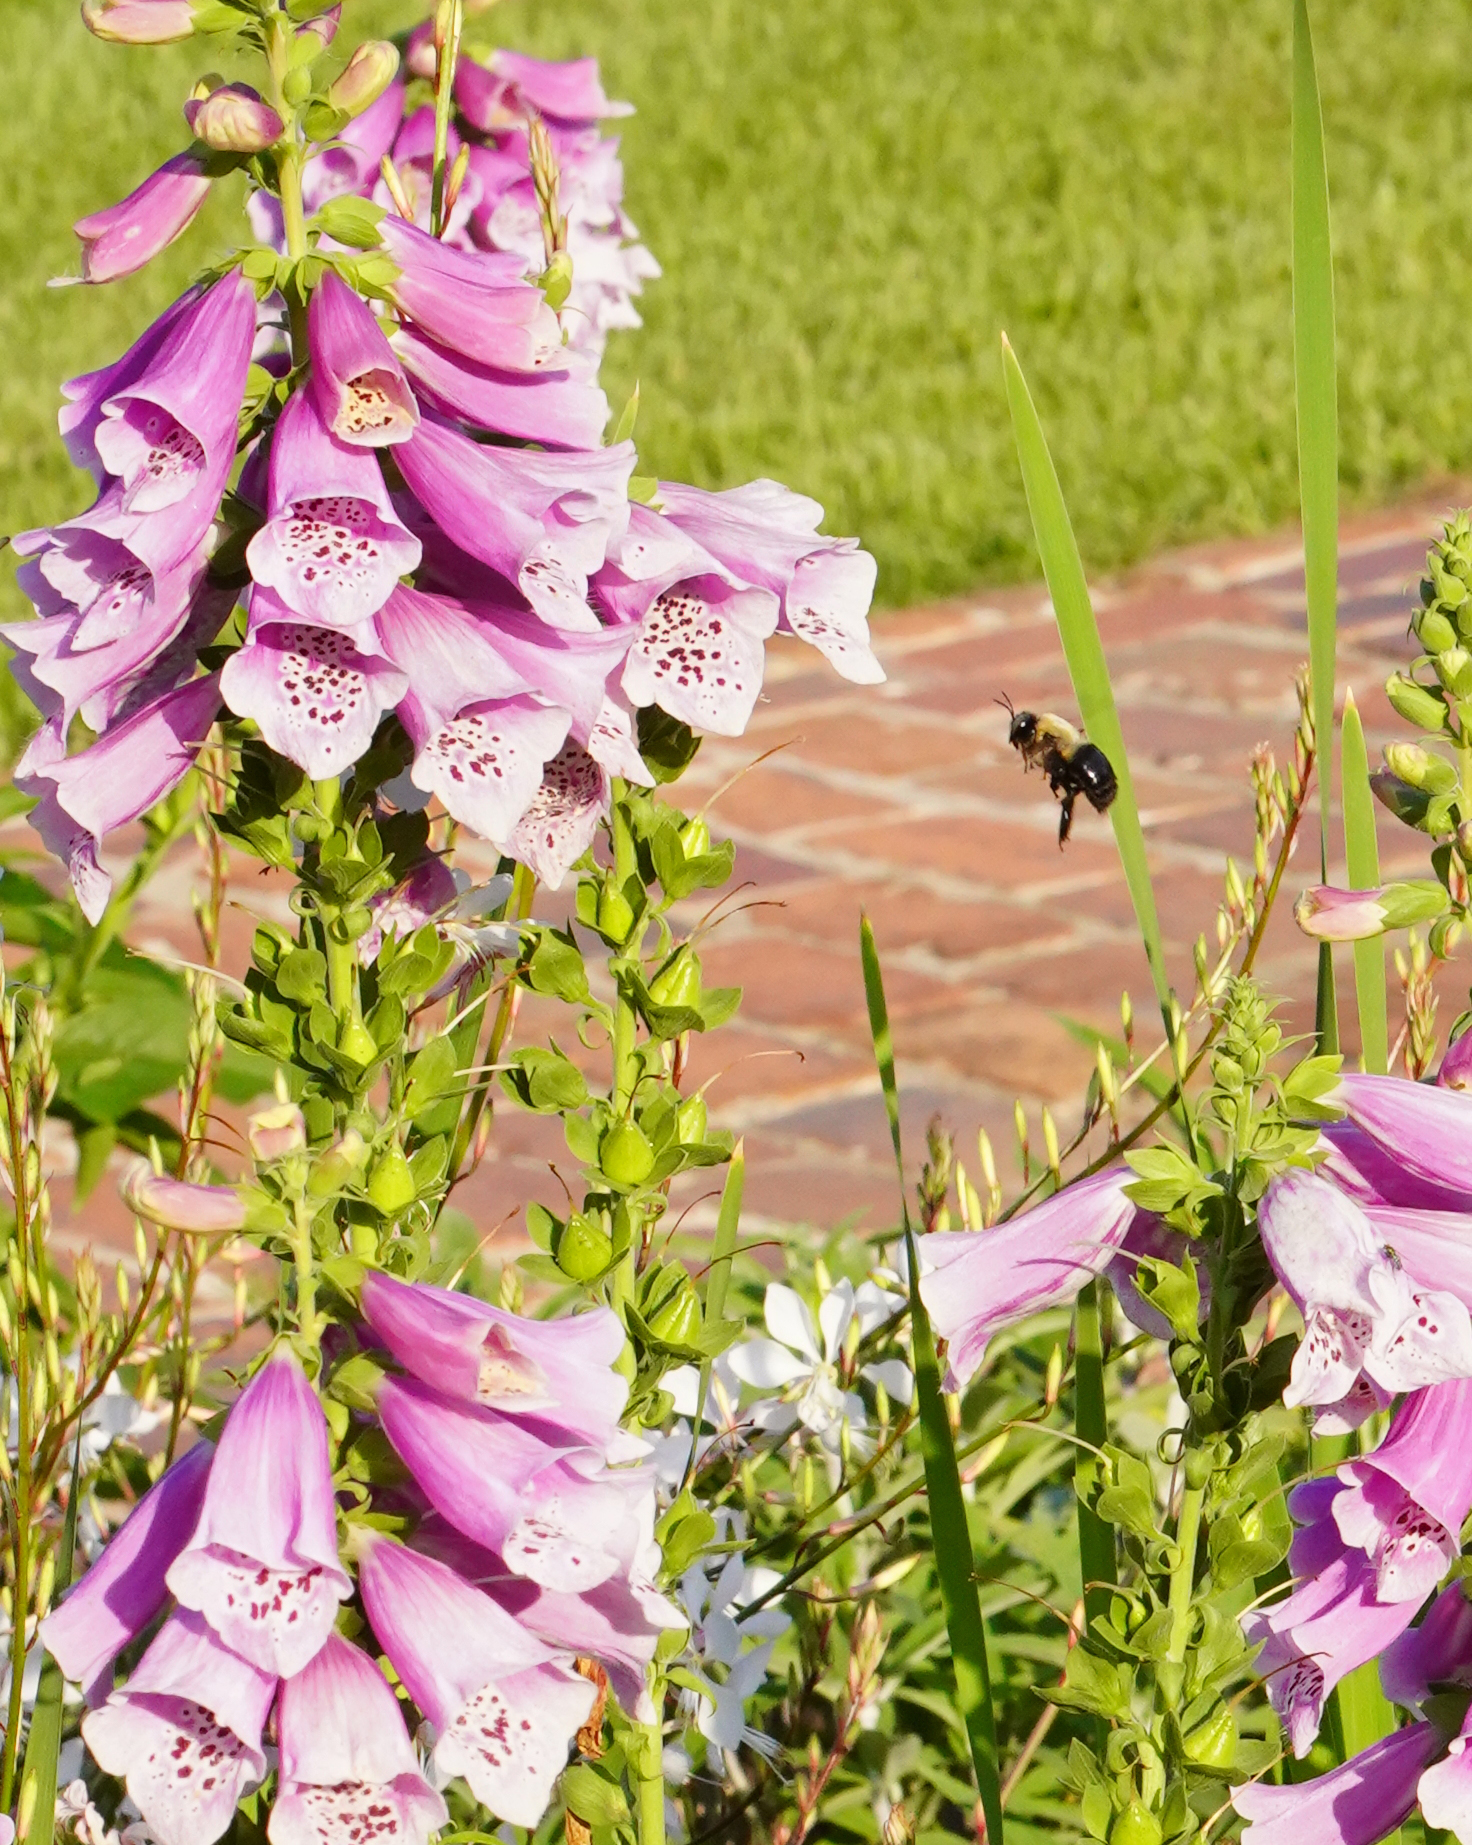 Hollyhocks are tall, showy flowers that are a great choice for the pollinator garden.
